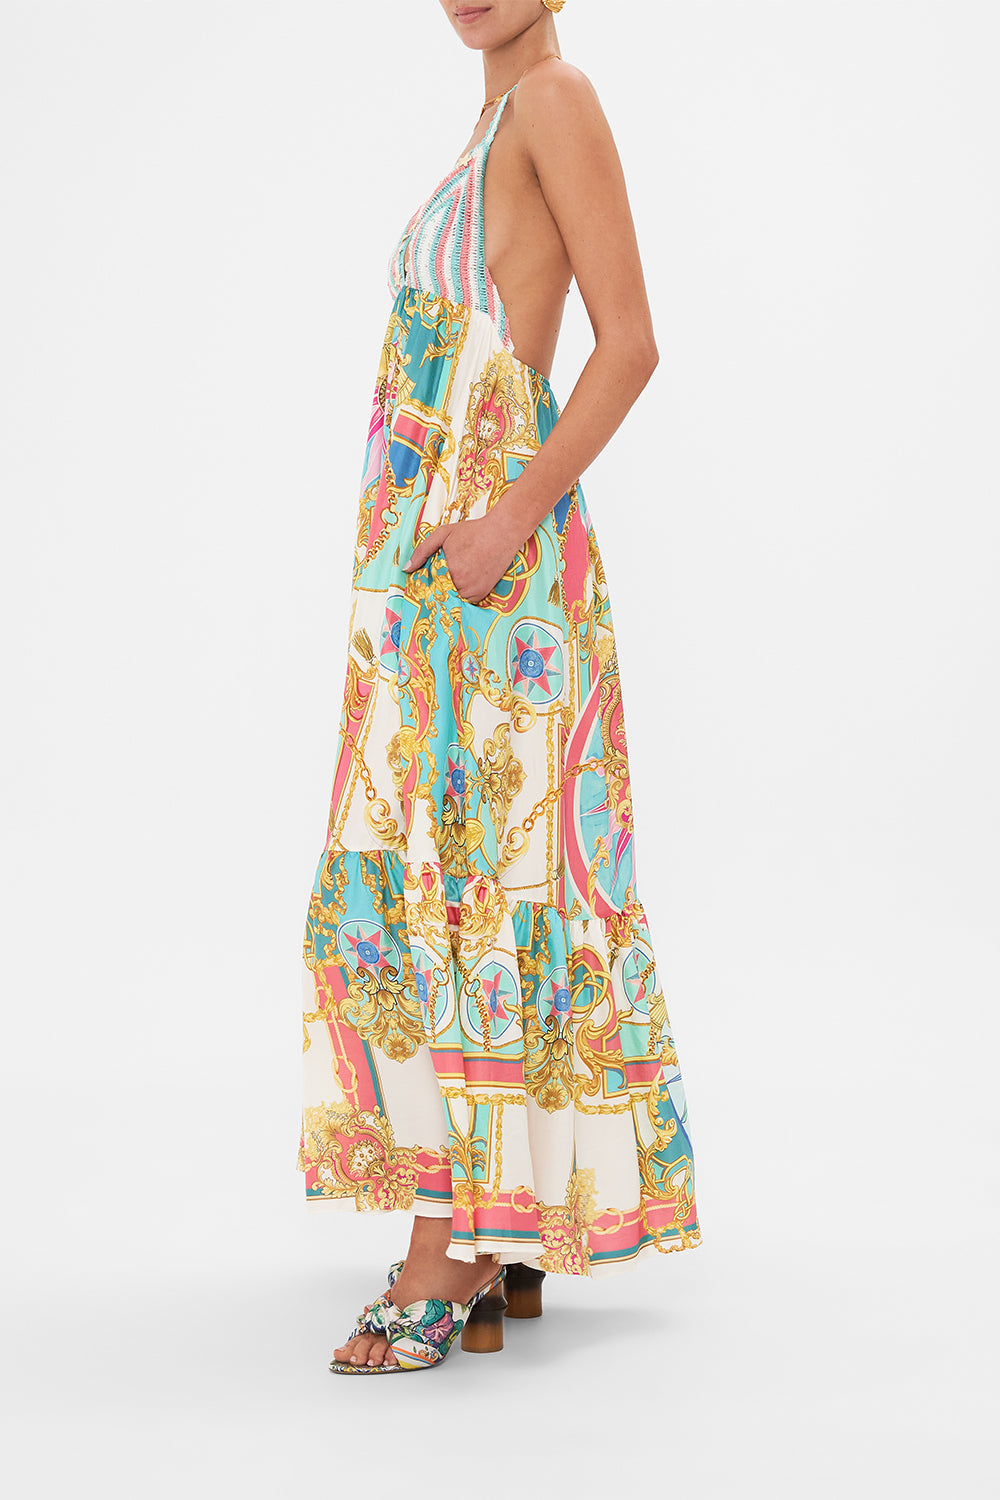 Side view of model wearing CAMILLA maxi dress in Sail Away With Me print